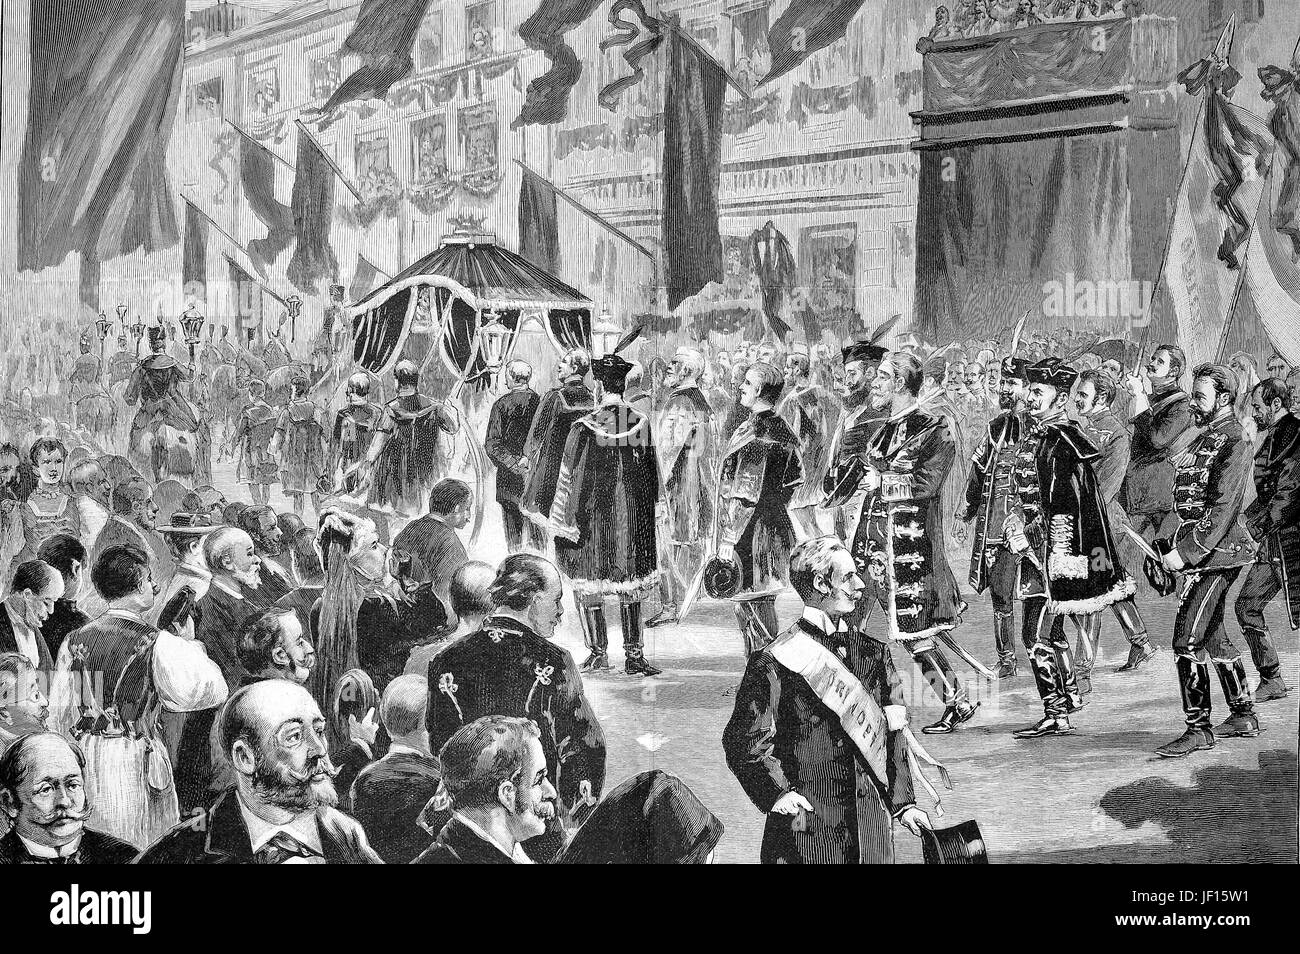 Historical illustration showing Kossuth's funeral procession in Budapest. Lajos Kossuth de Udvard et Kossuthfalva, Louis Kossuth, 1802 - 1894, a Hungarian lawyer, journalist, politician, statesman and Governor-President of the Kingdom of Hungary during the revolution of 1848 - 1849, Digital improved reproduction from an original print from 1888 Stock Photo